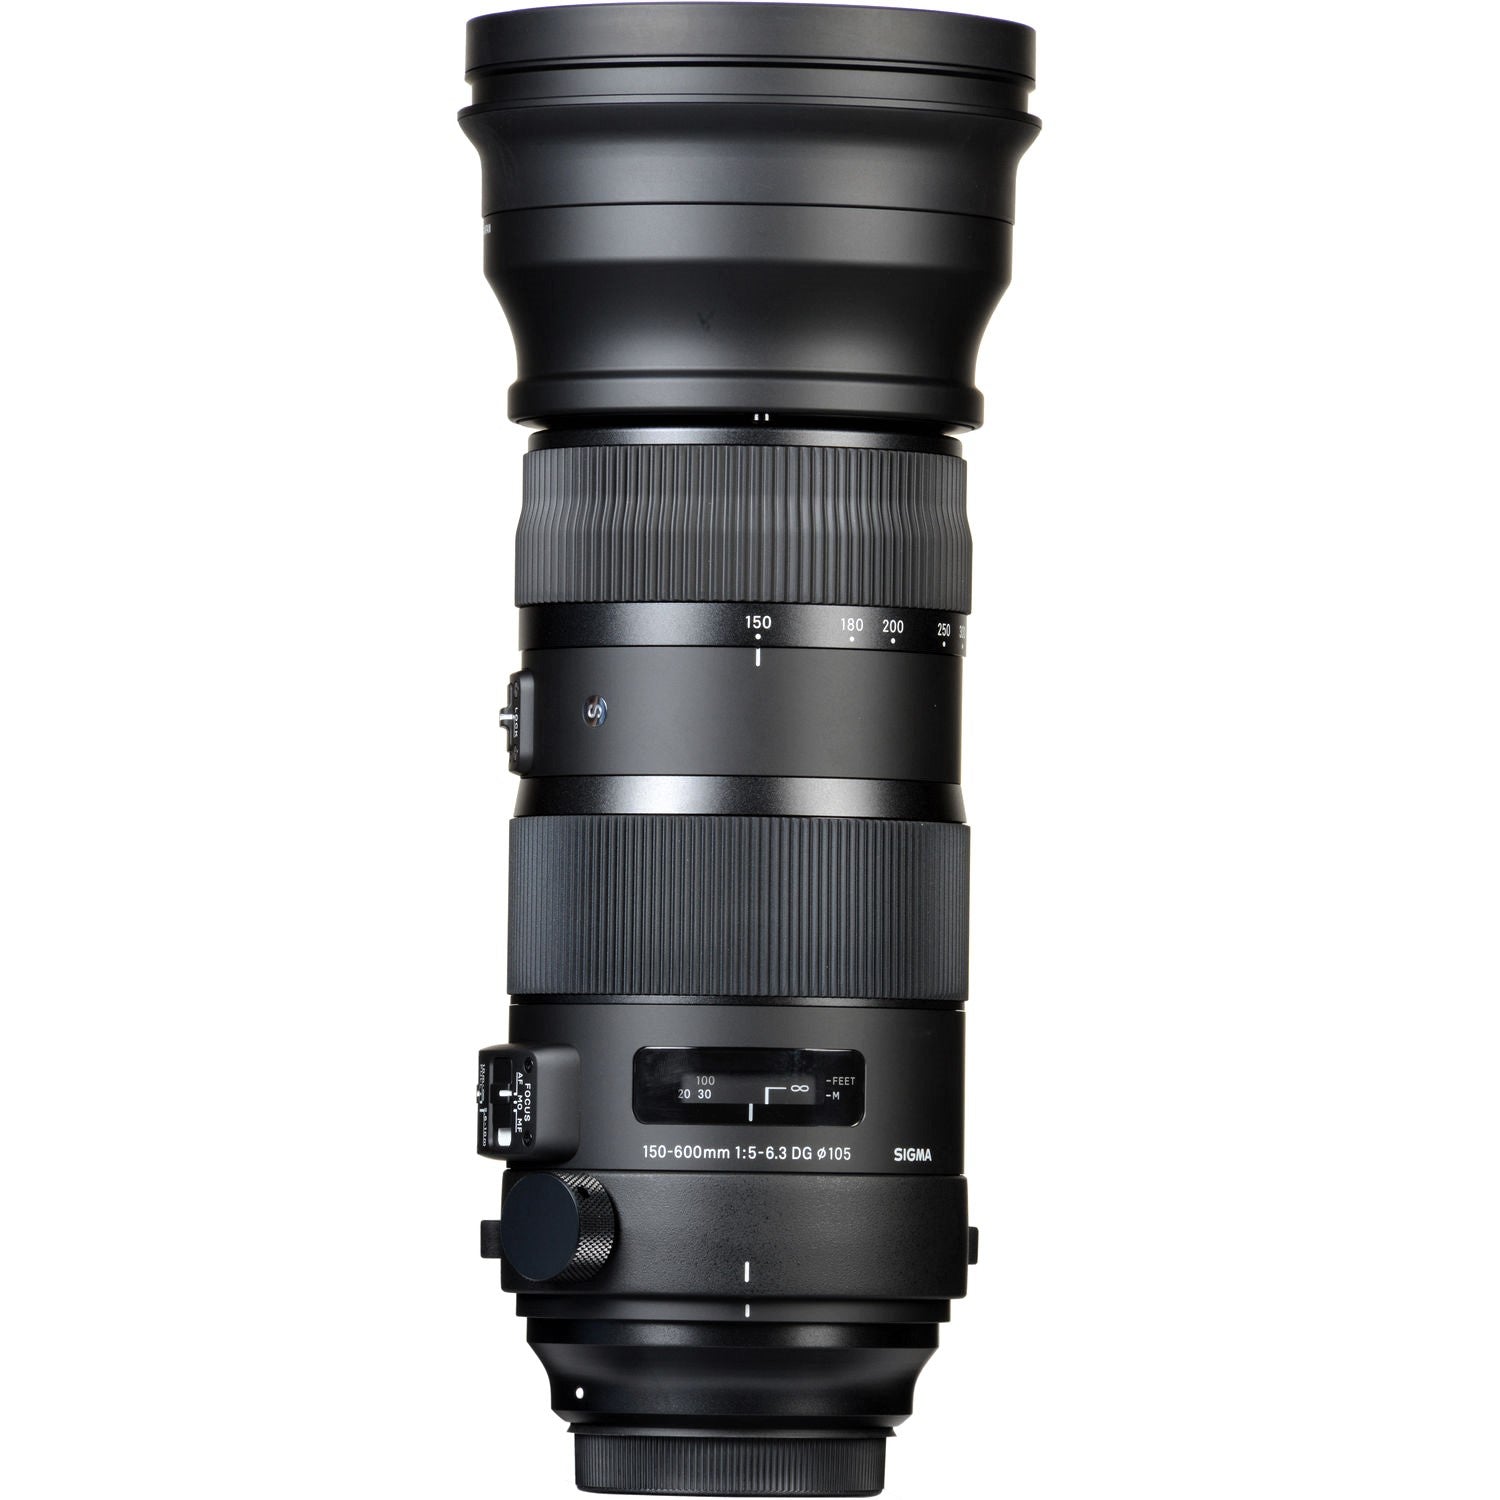 Sigma 150-600mm F5-6.3 DG OS HSM Sports Lens for Sigma SA with Attached Lens Hood on the Top